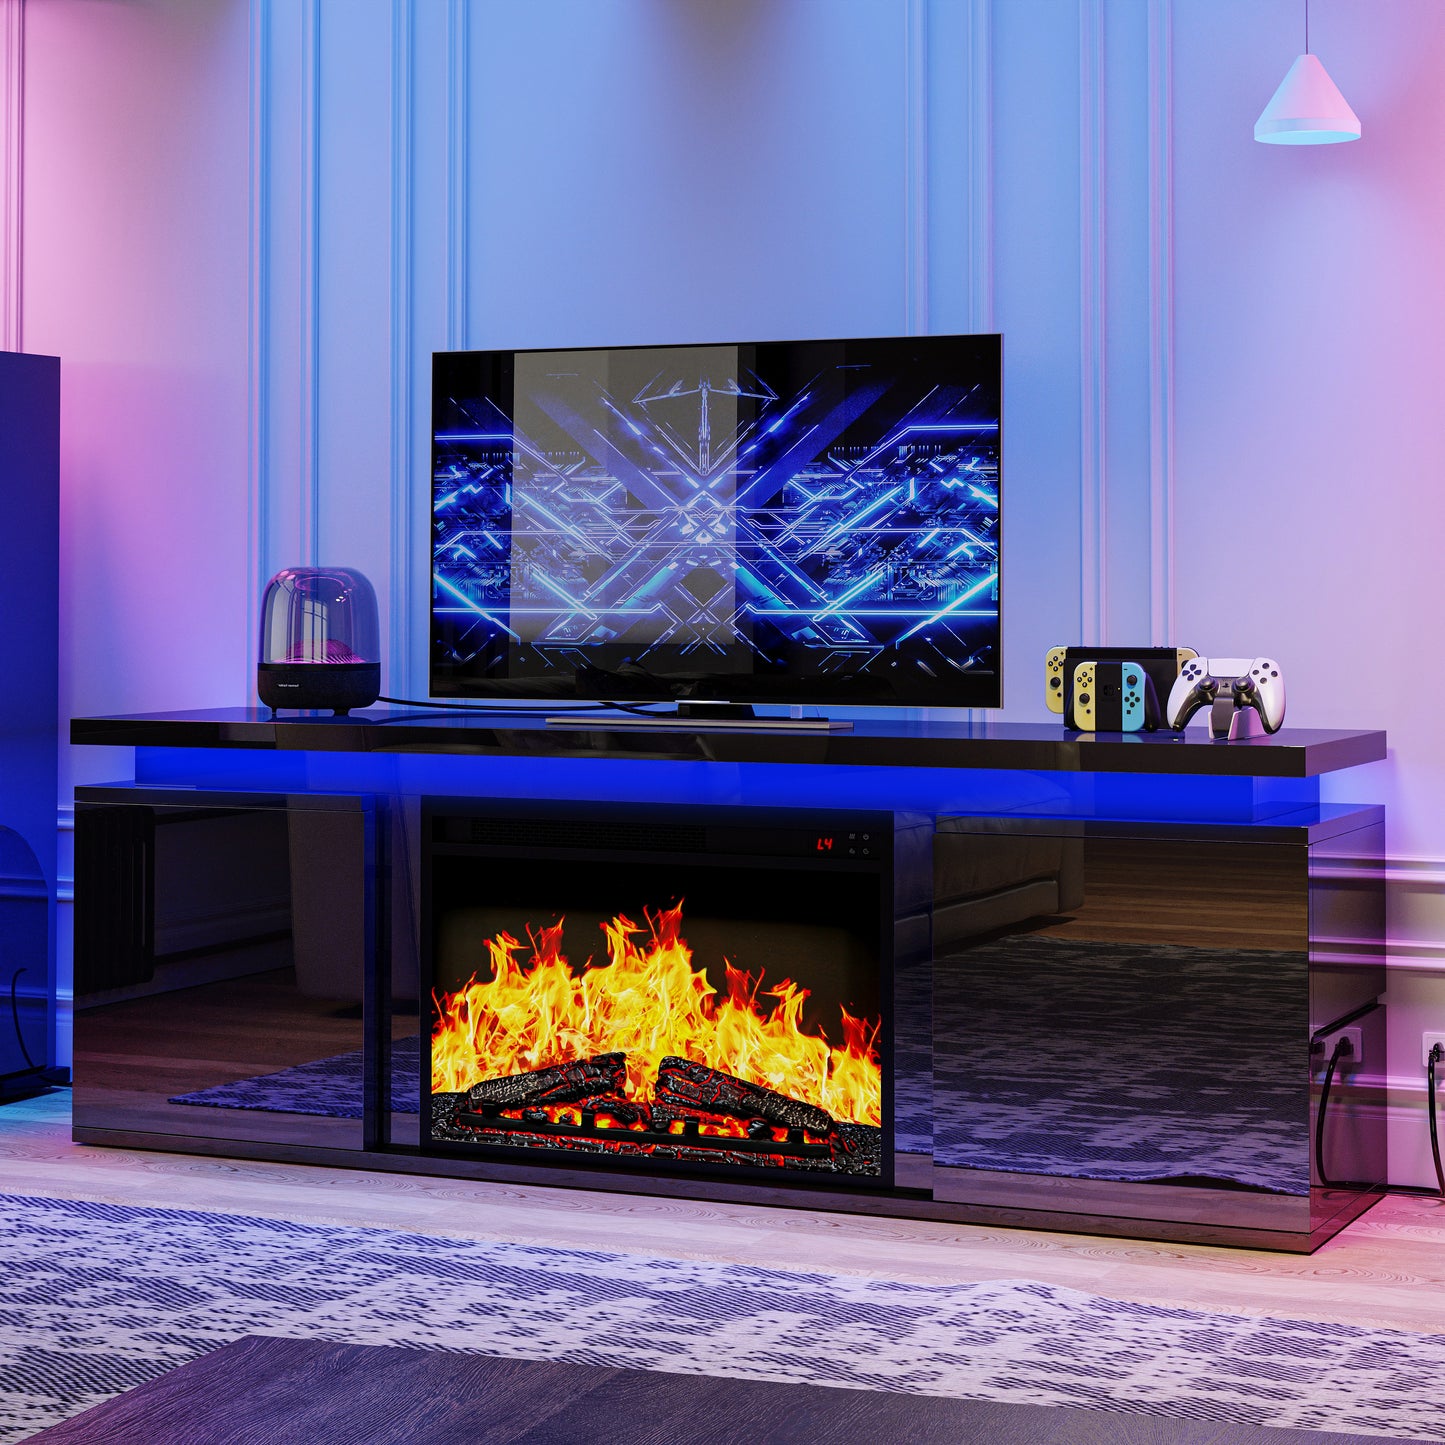 IRONCK Black Fireplace TV Stand with Electric Fireplace